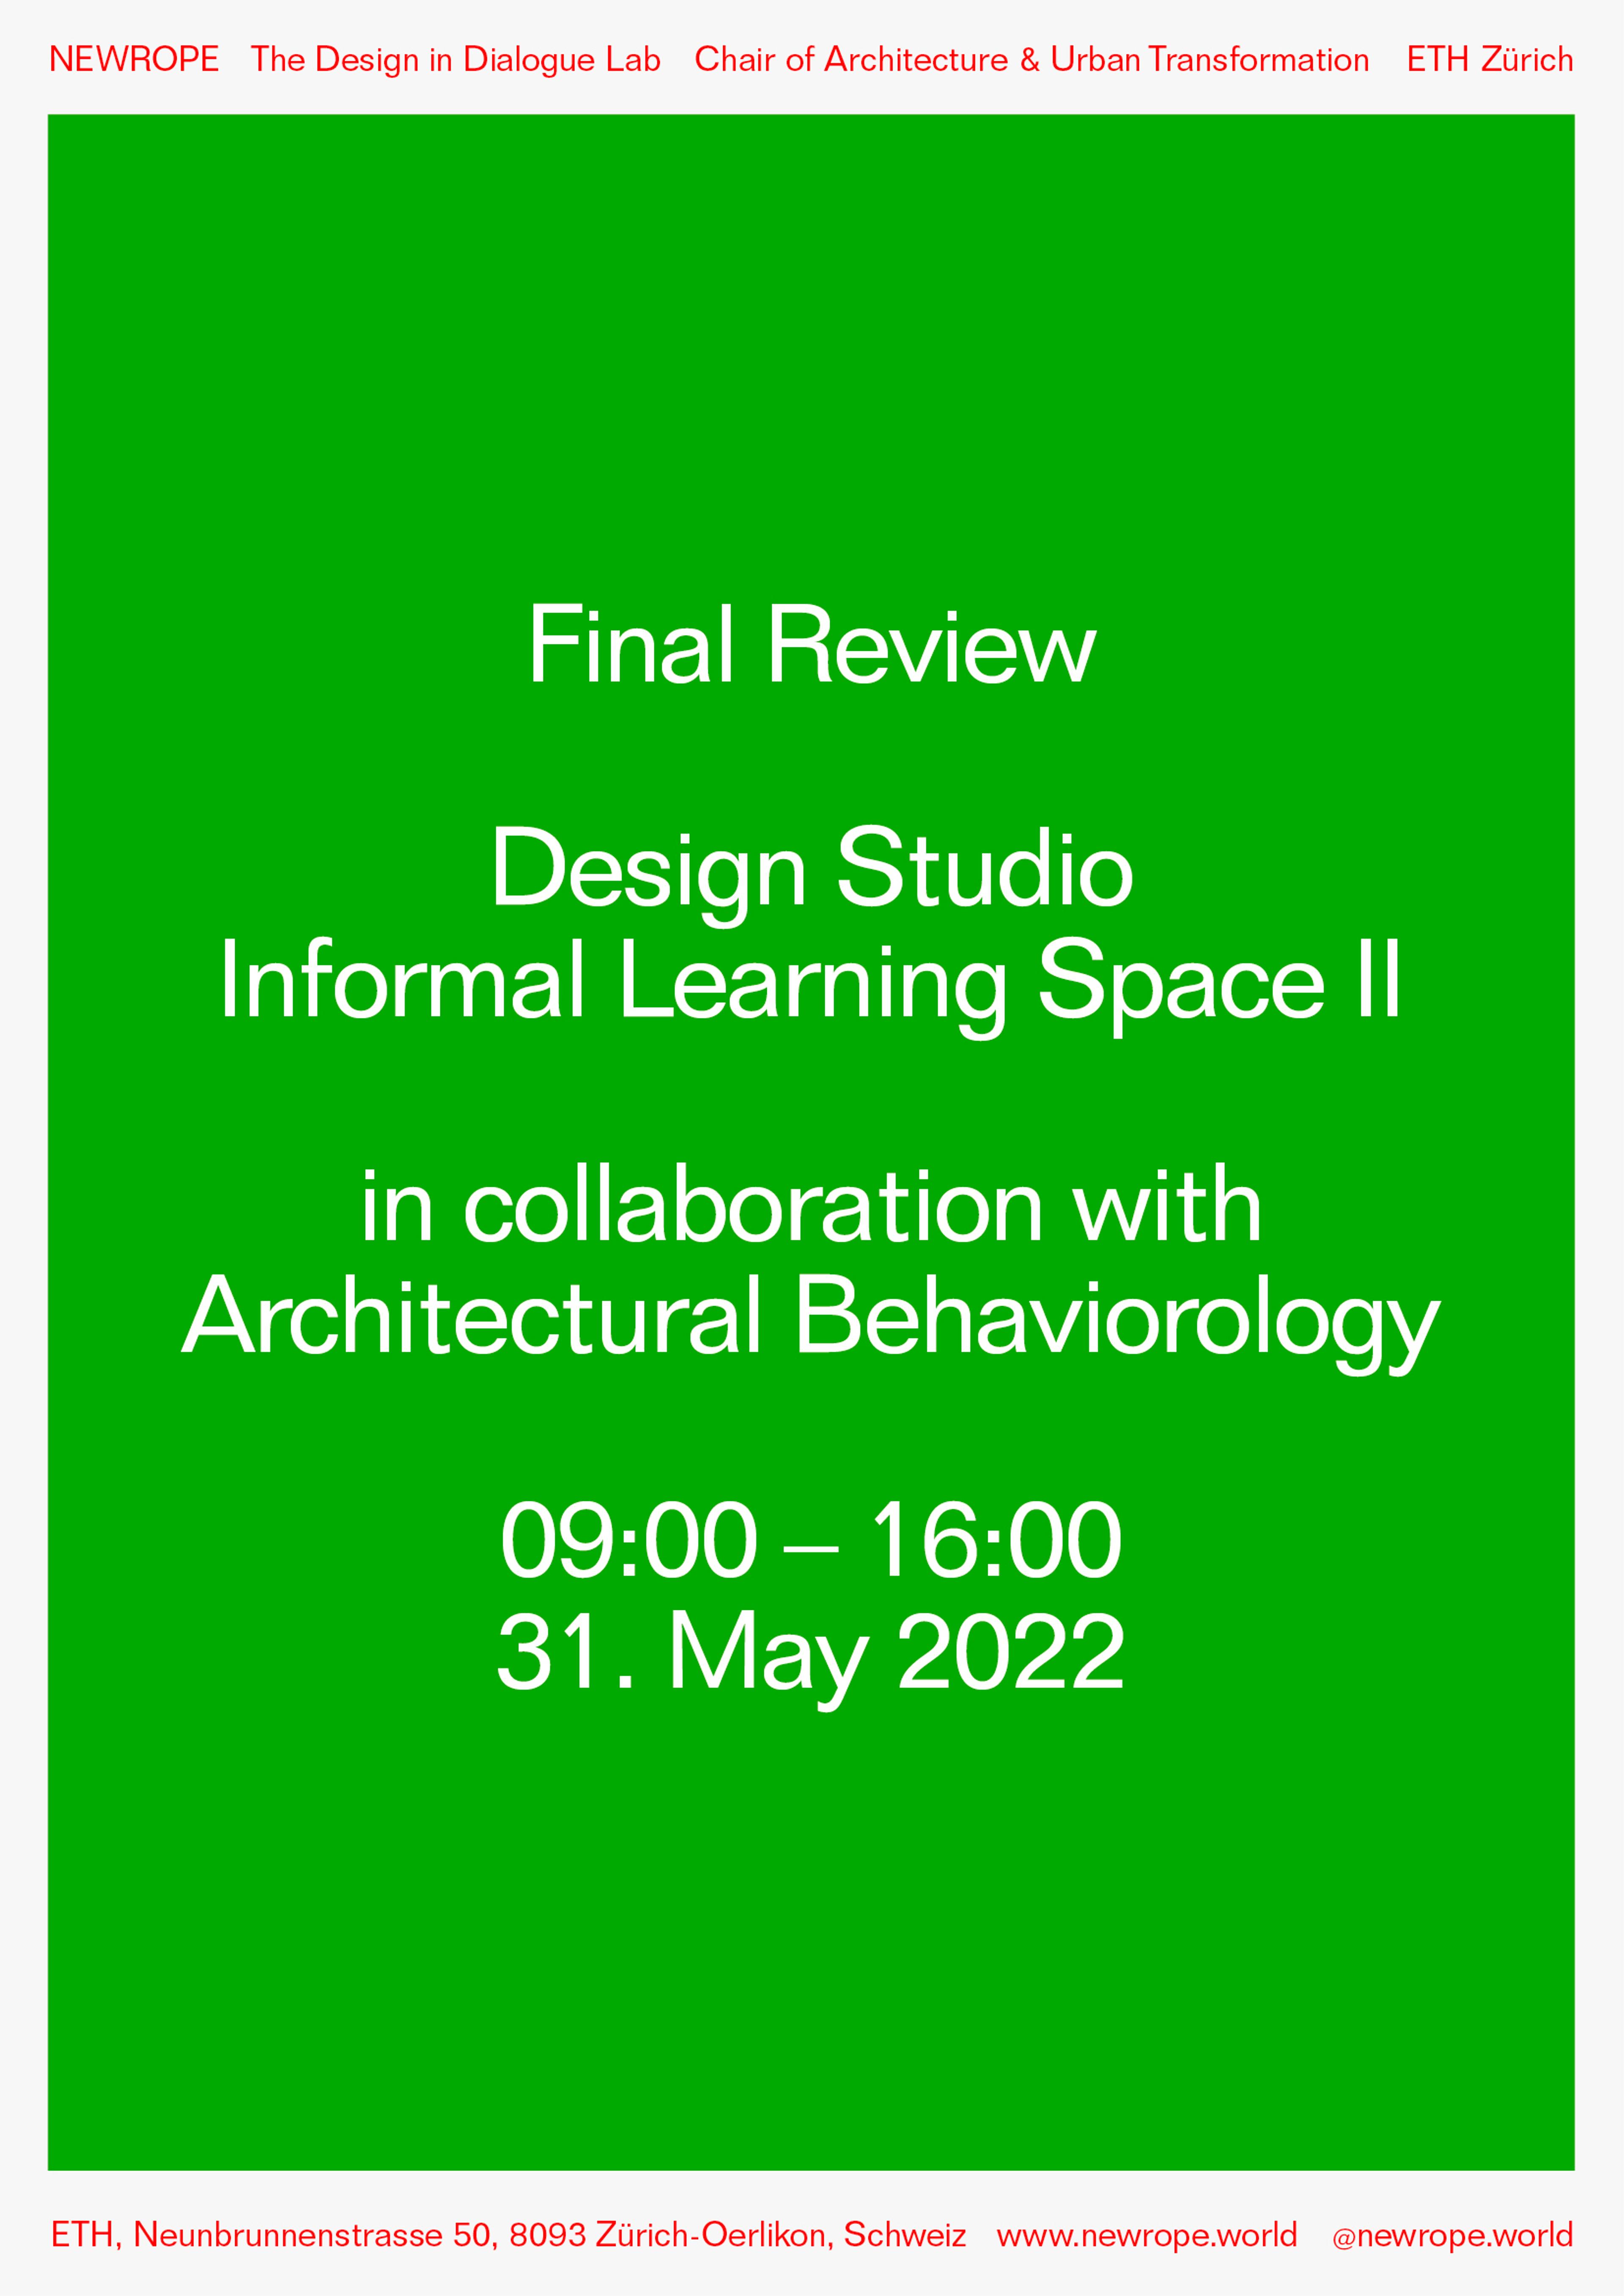 Announcement: Final Review Studio Informal Learning Spaces II